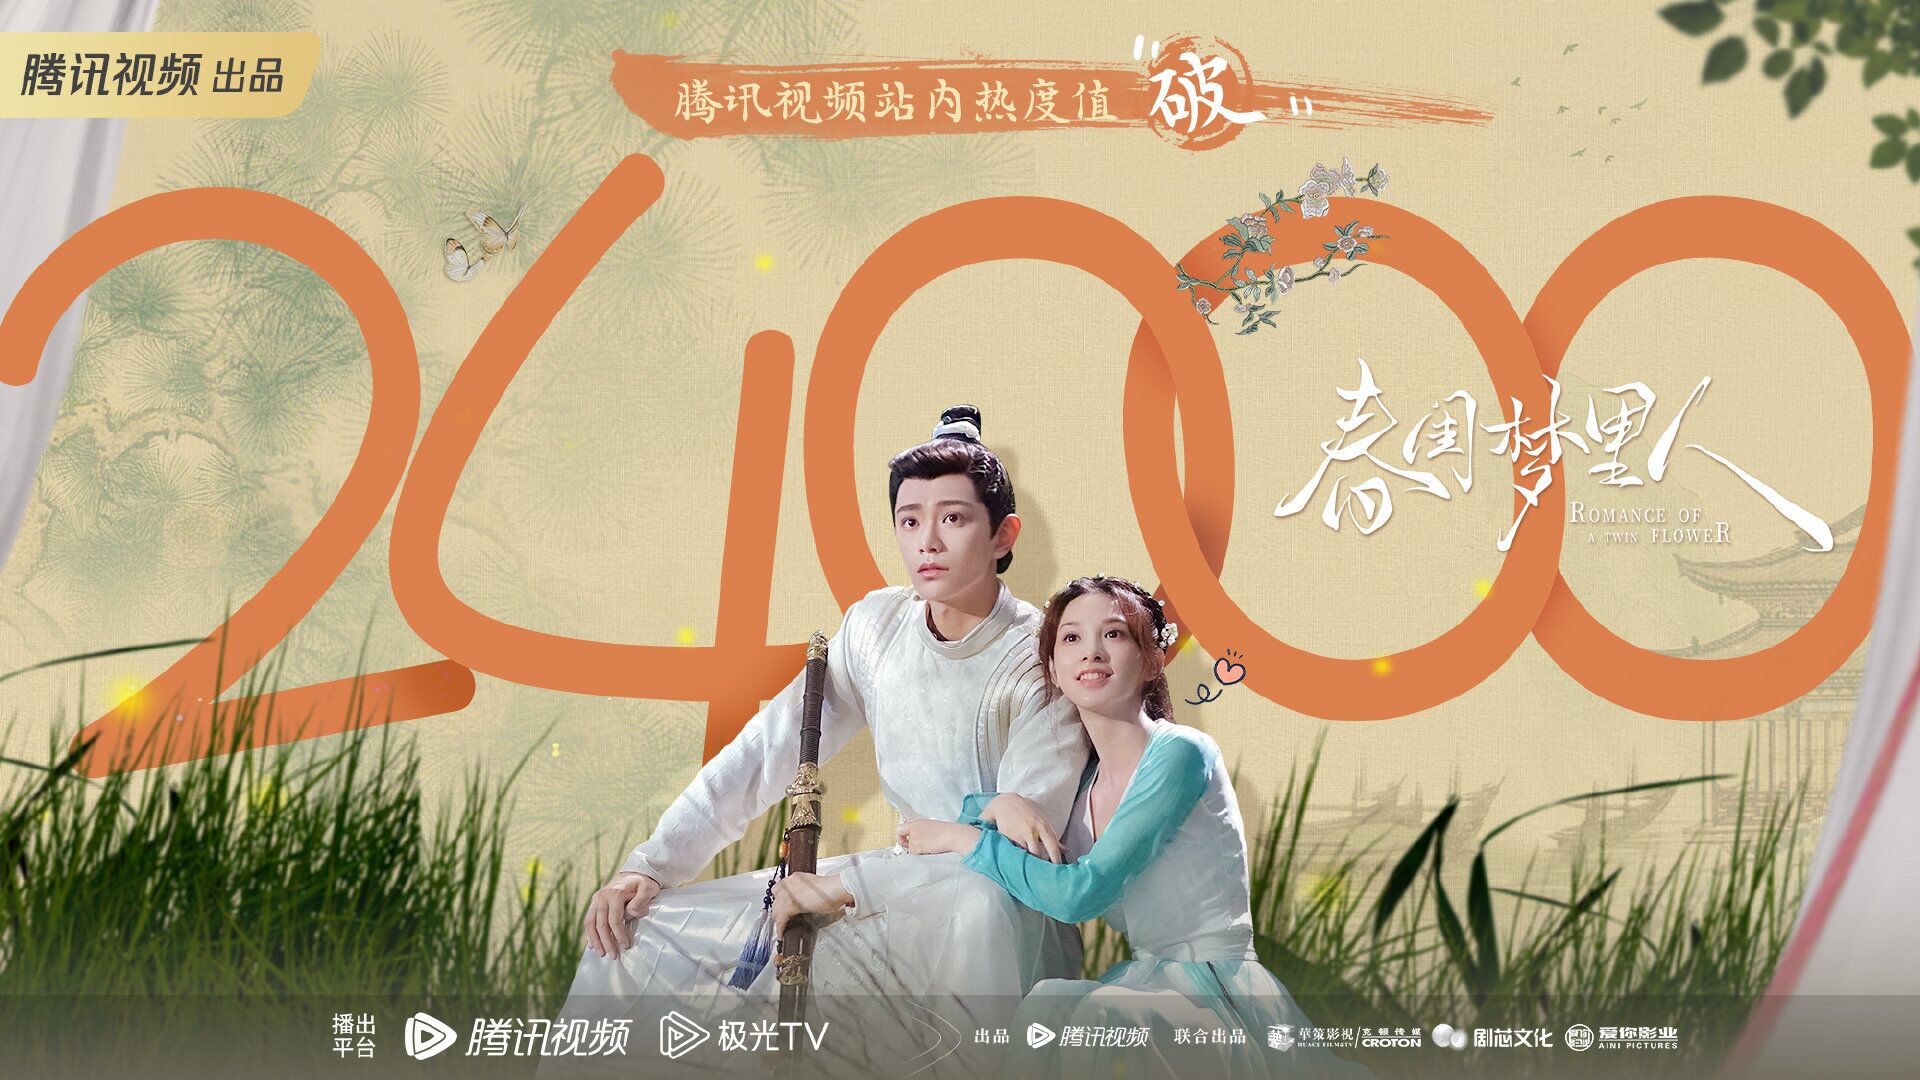 Romance of a Twin Flower with Ding Yuxi